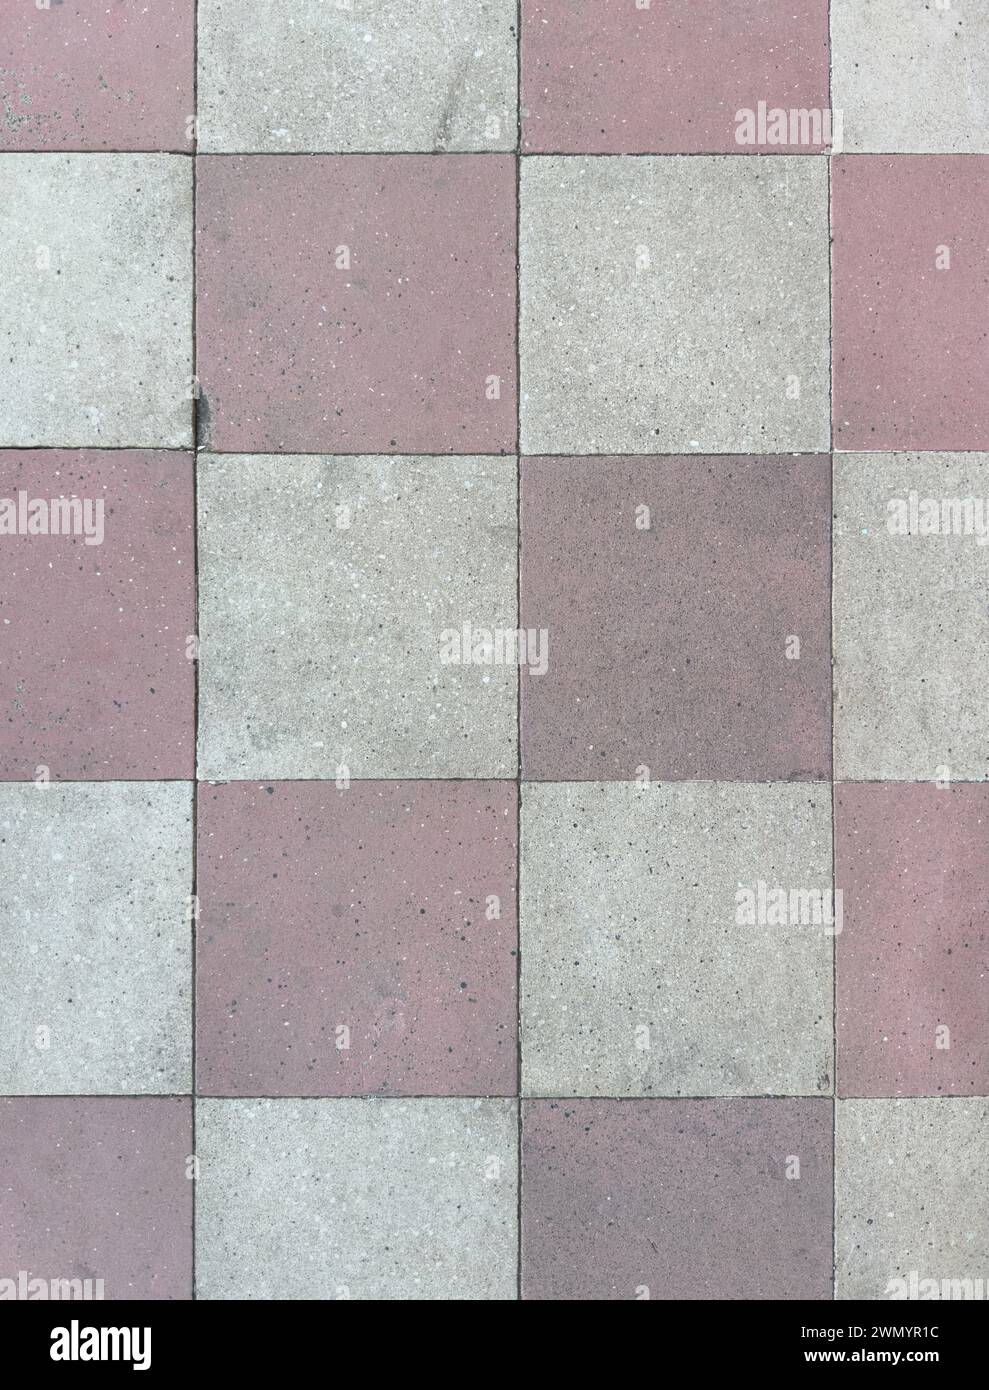 Square floor tiles red and gray color close up view Stock Photo